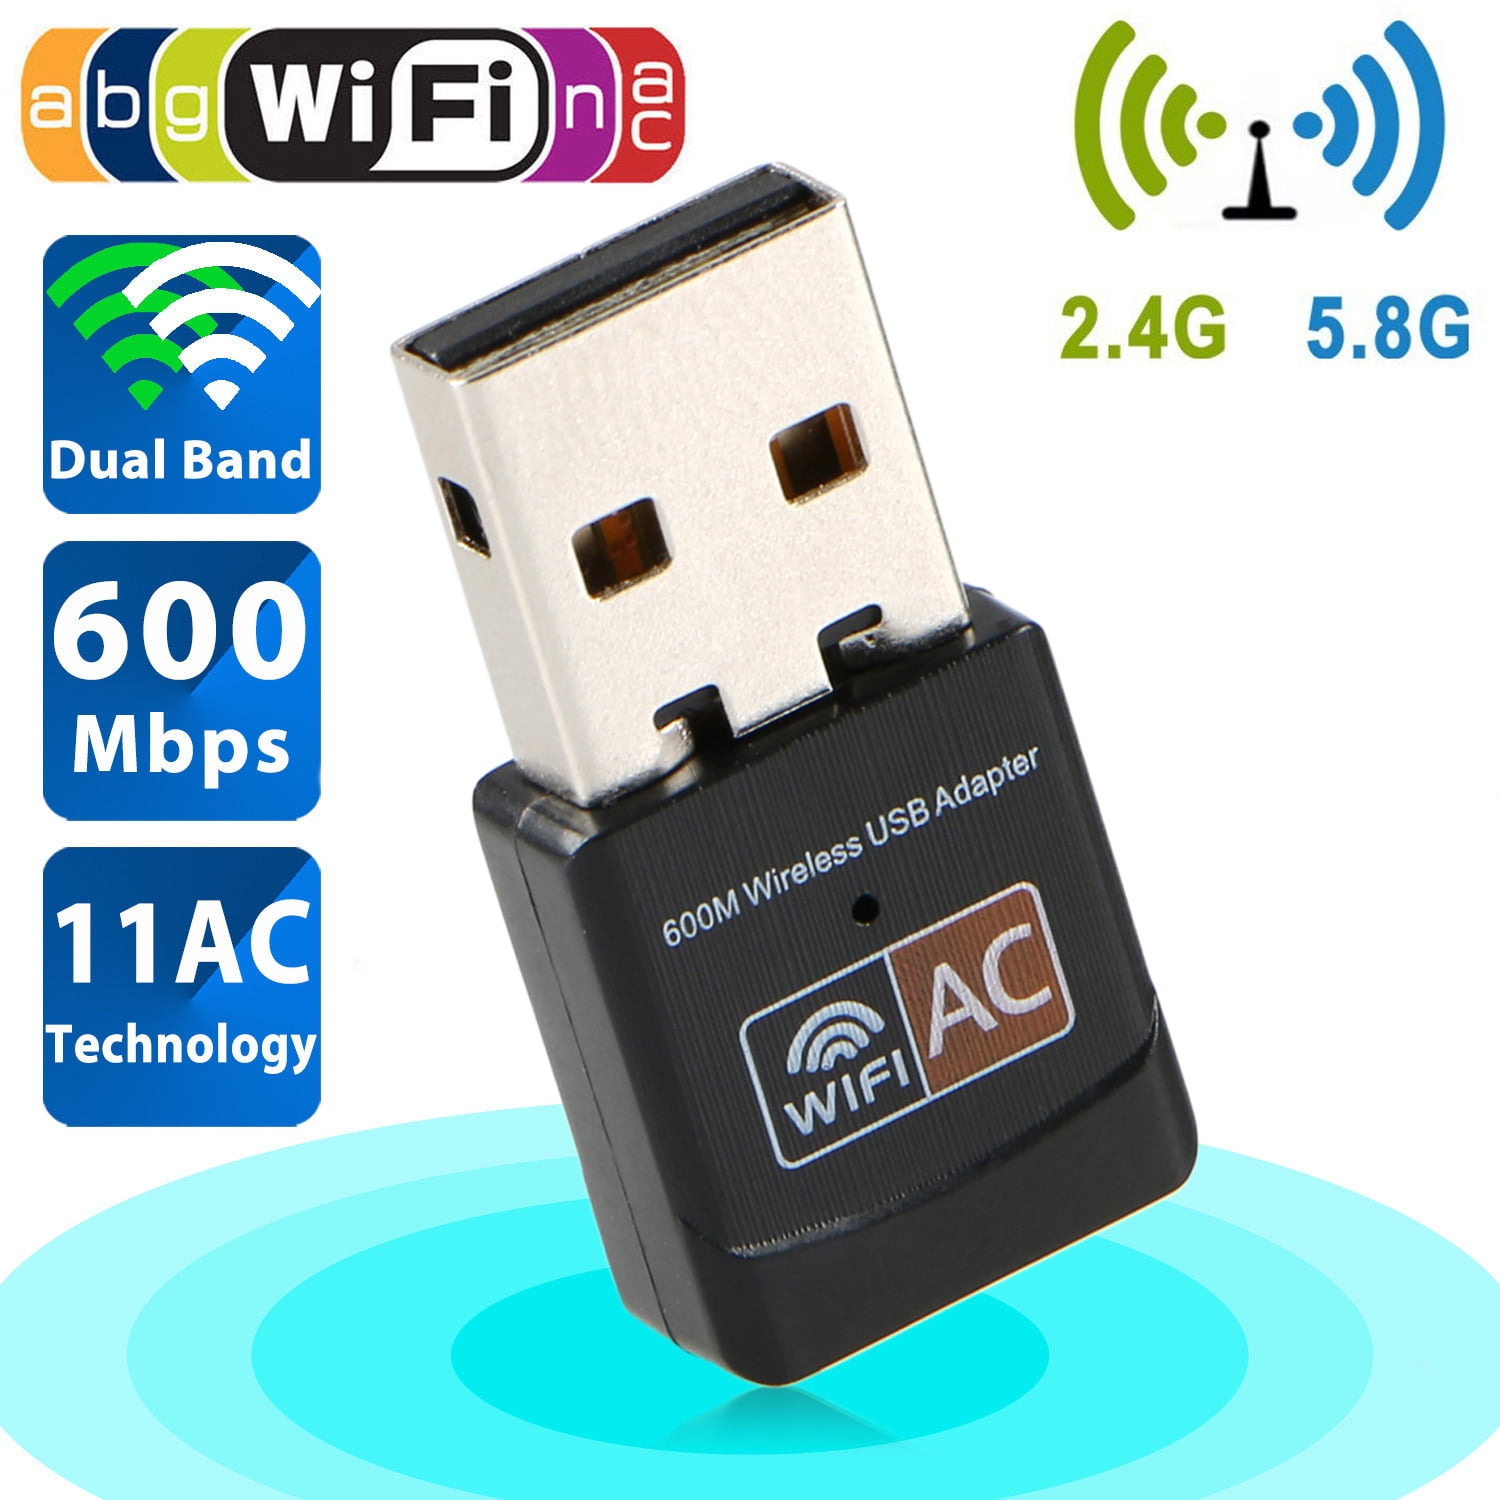 Wireless WiFi Network USB Receiver Card Adapter 300Mbps  For Desktop PC Laptop 